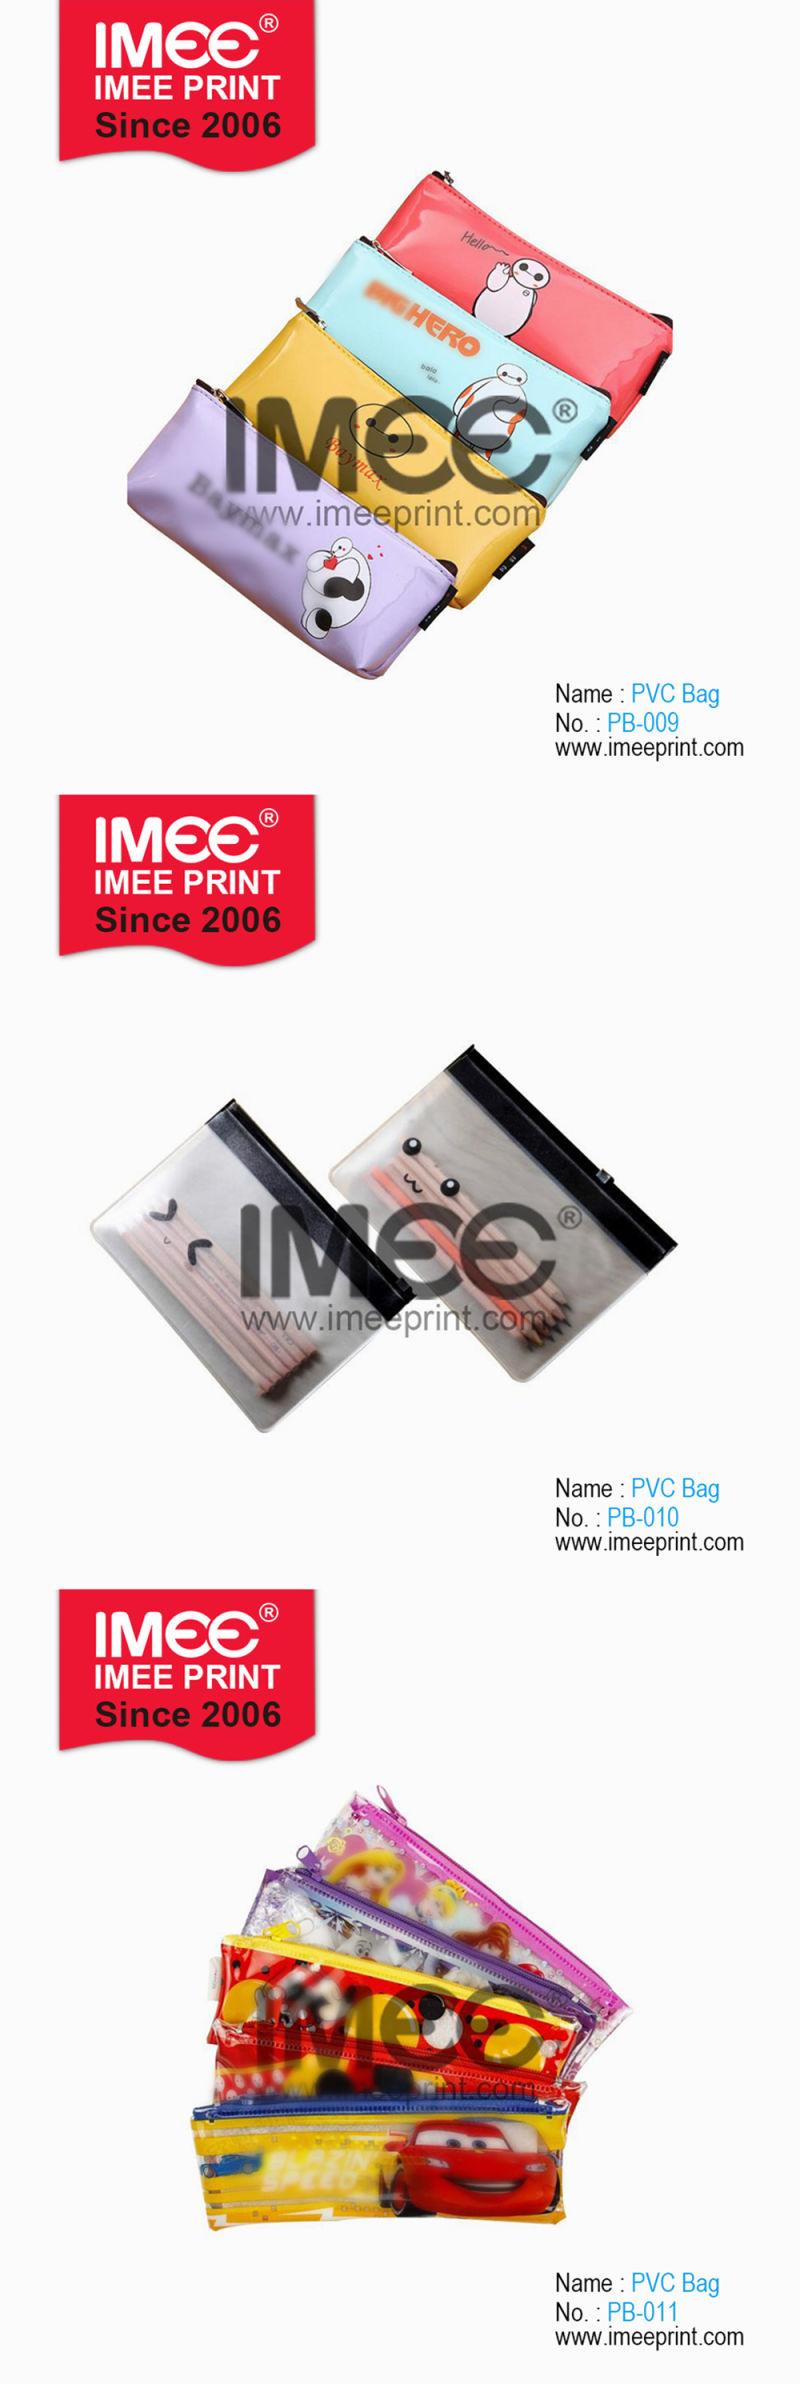 Imee Custom Hand Held Caught Zipper Make up Cosmetic Pen Packaging Clutch Pouch PVC Bag